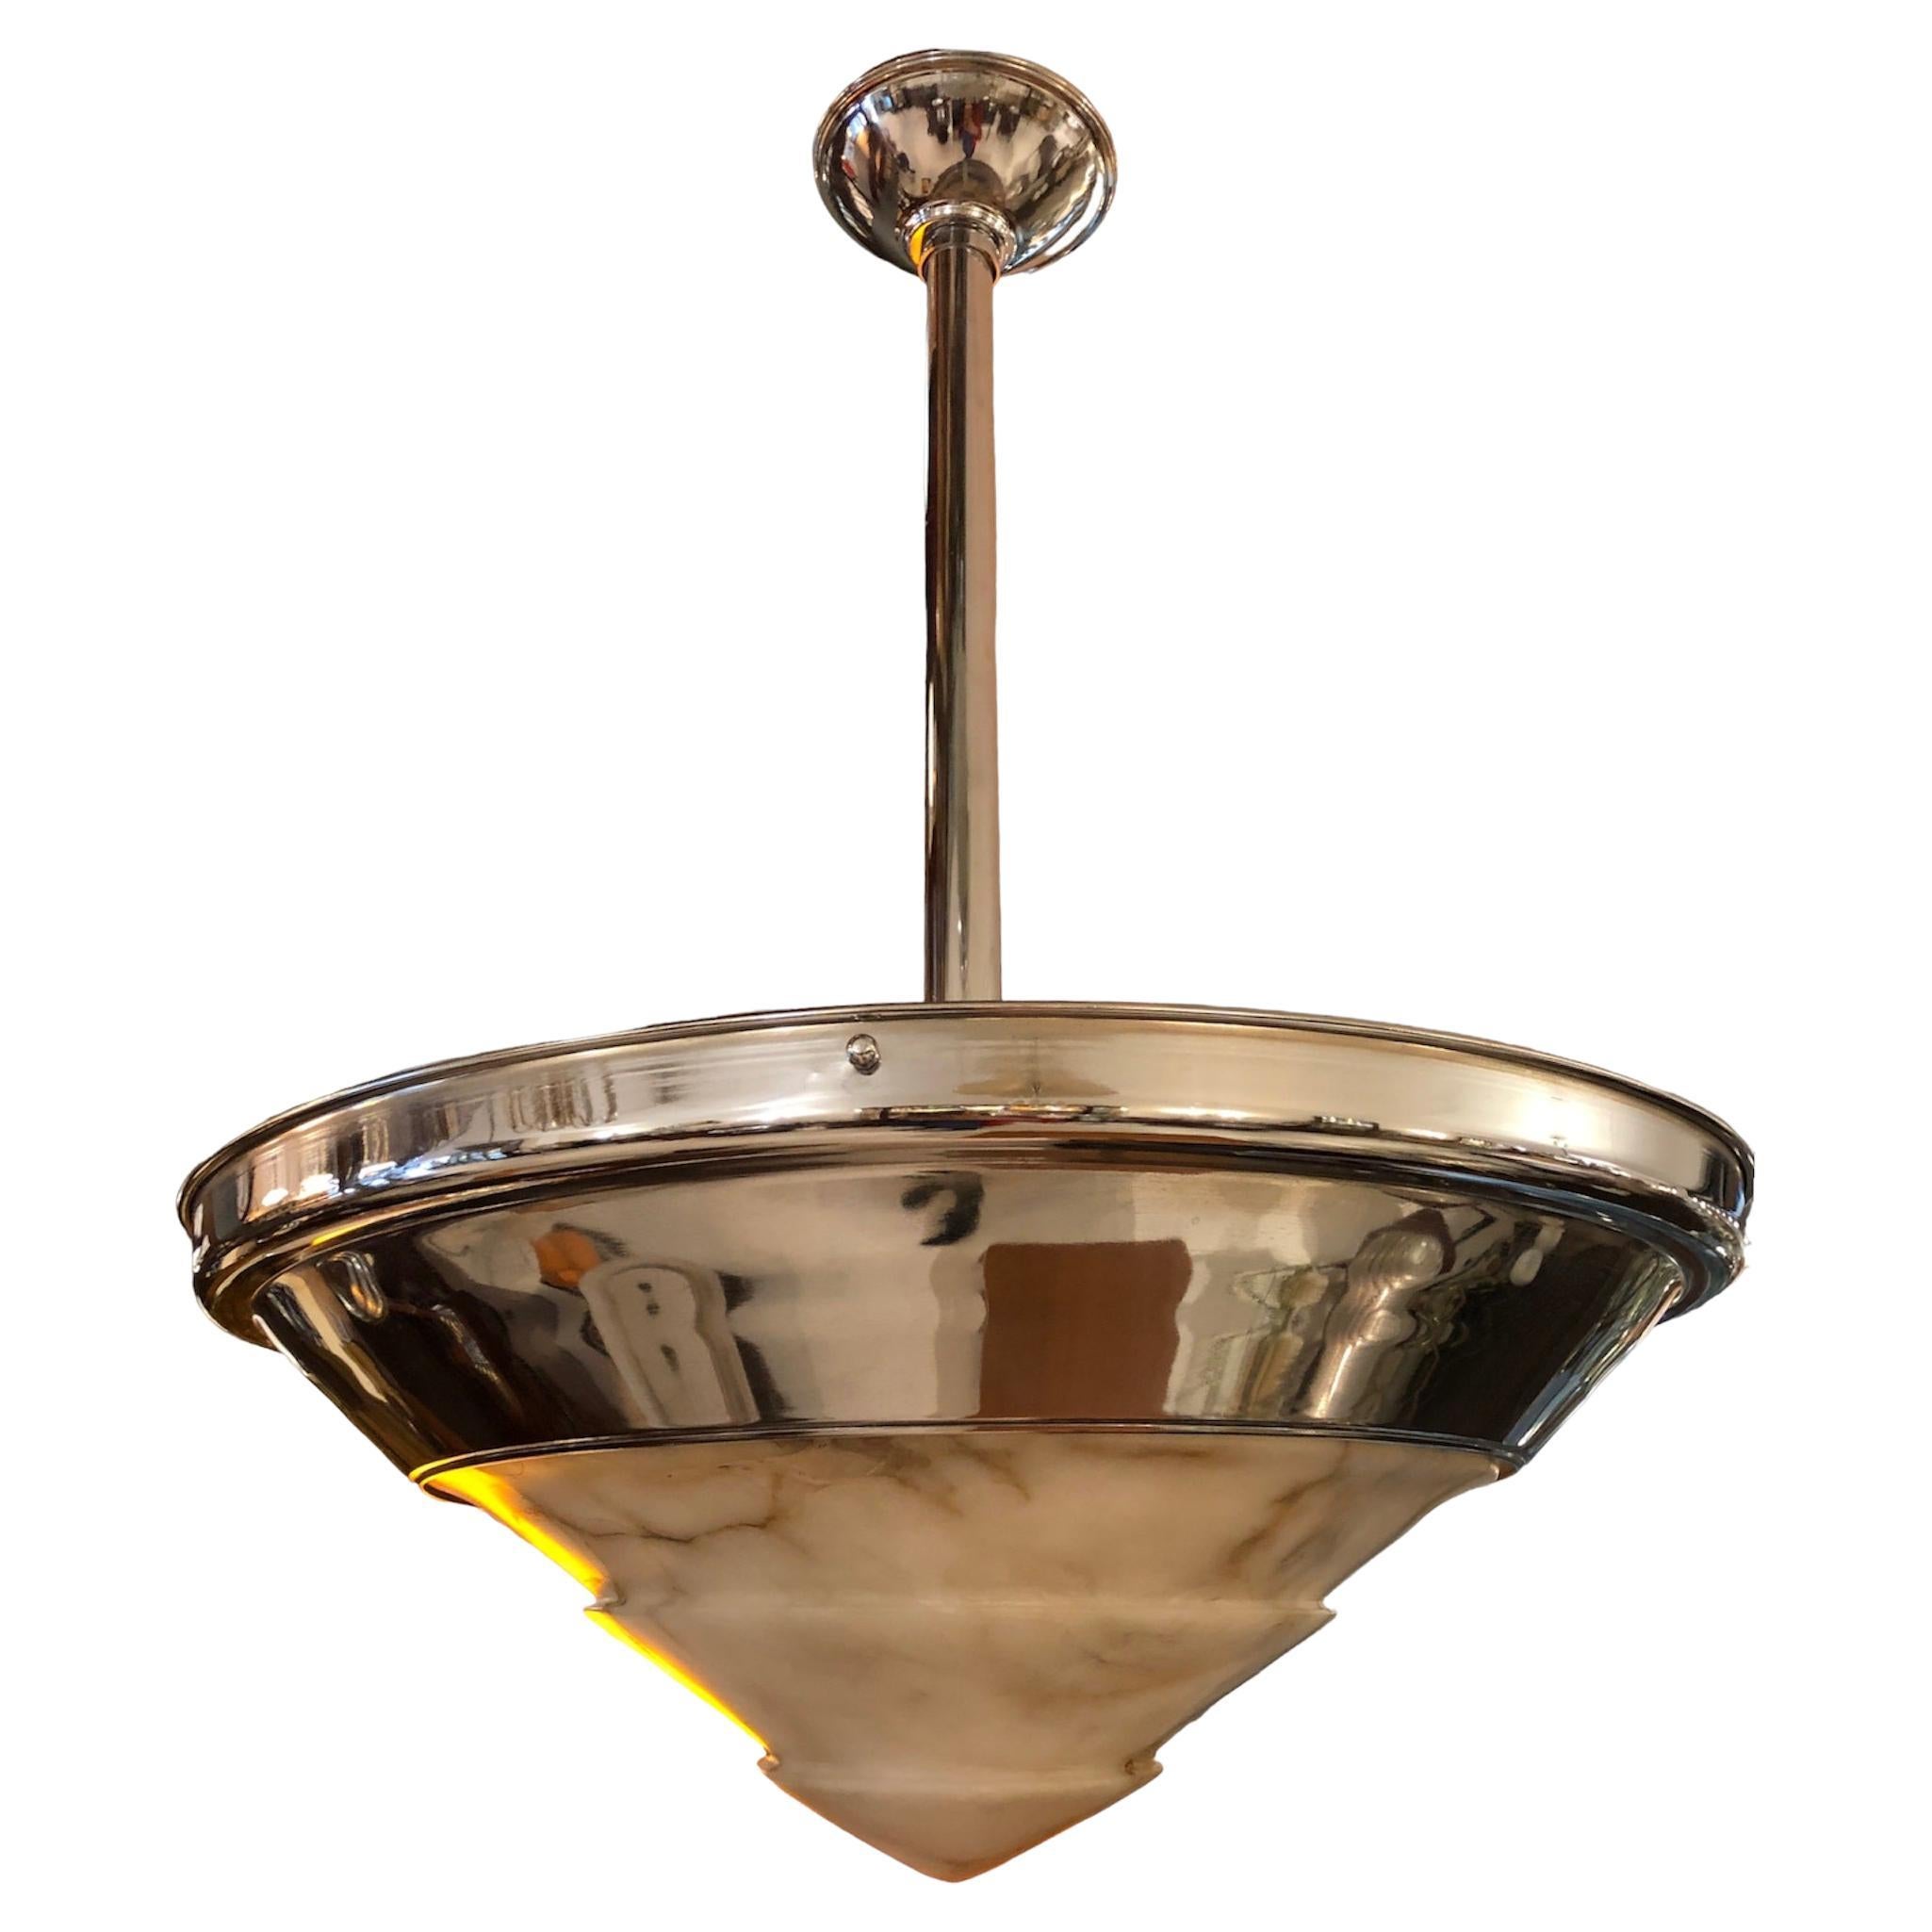 Art Deco Hanging Lamp in Chrome and Alabaster, German, 1930 For Sale